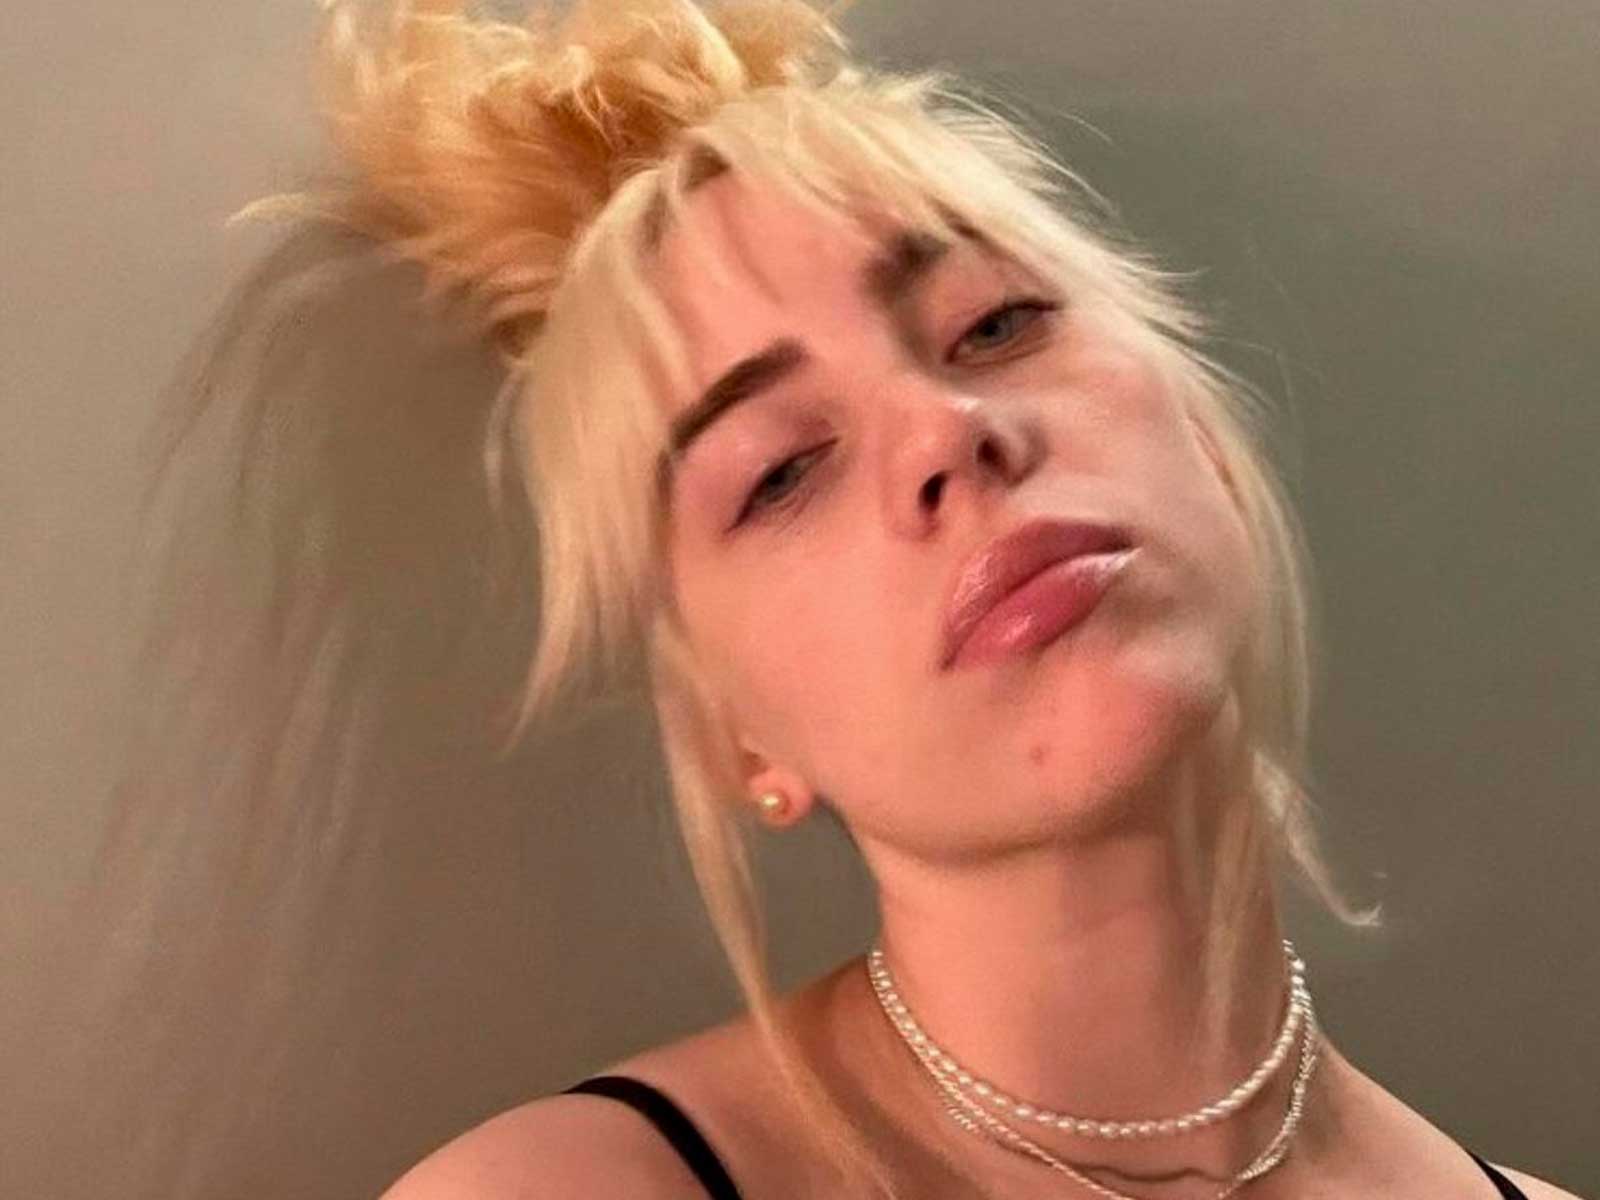 Here’s how Billie Eilish got out of a “dark situation”